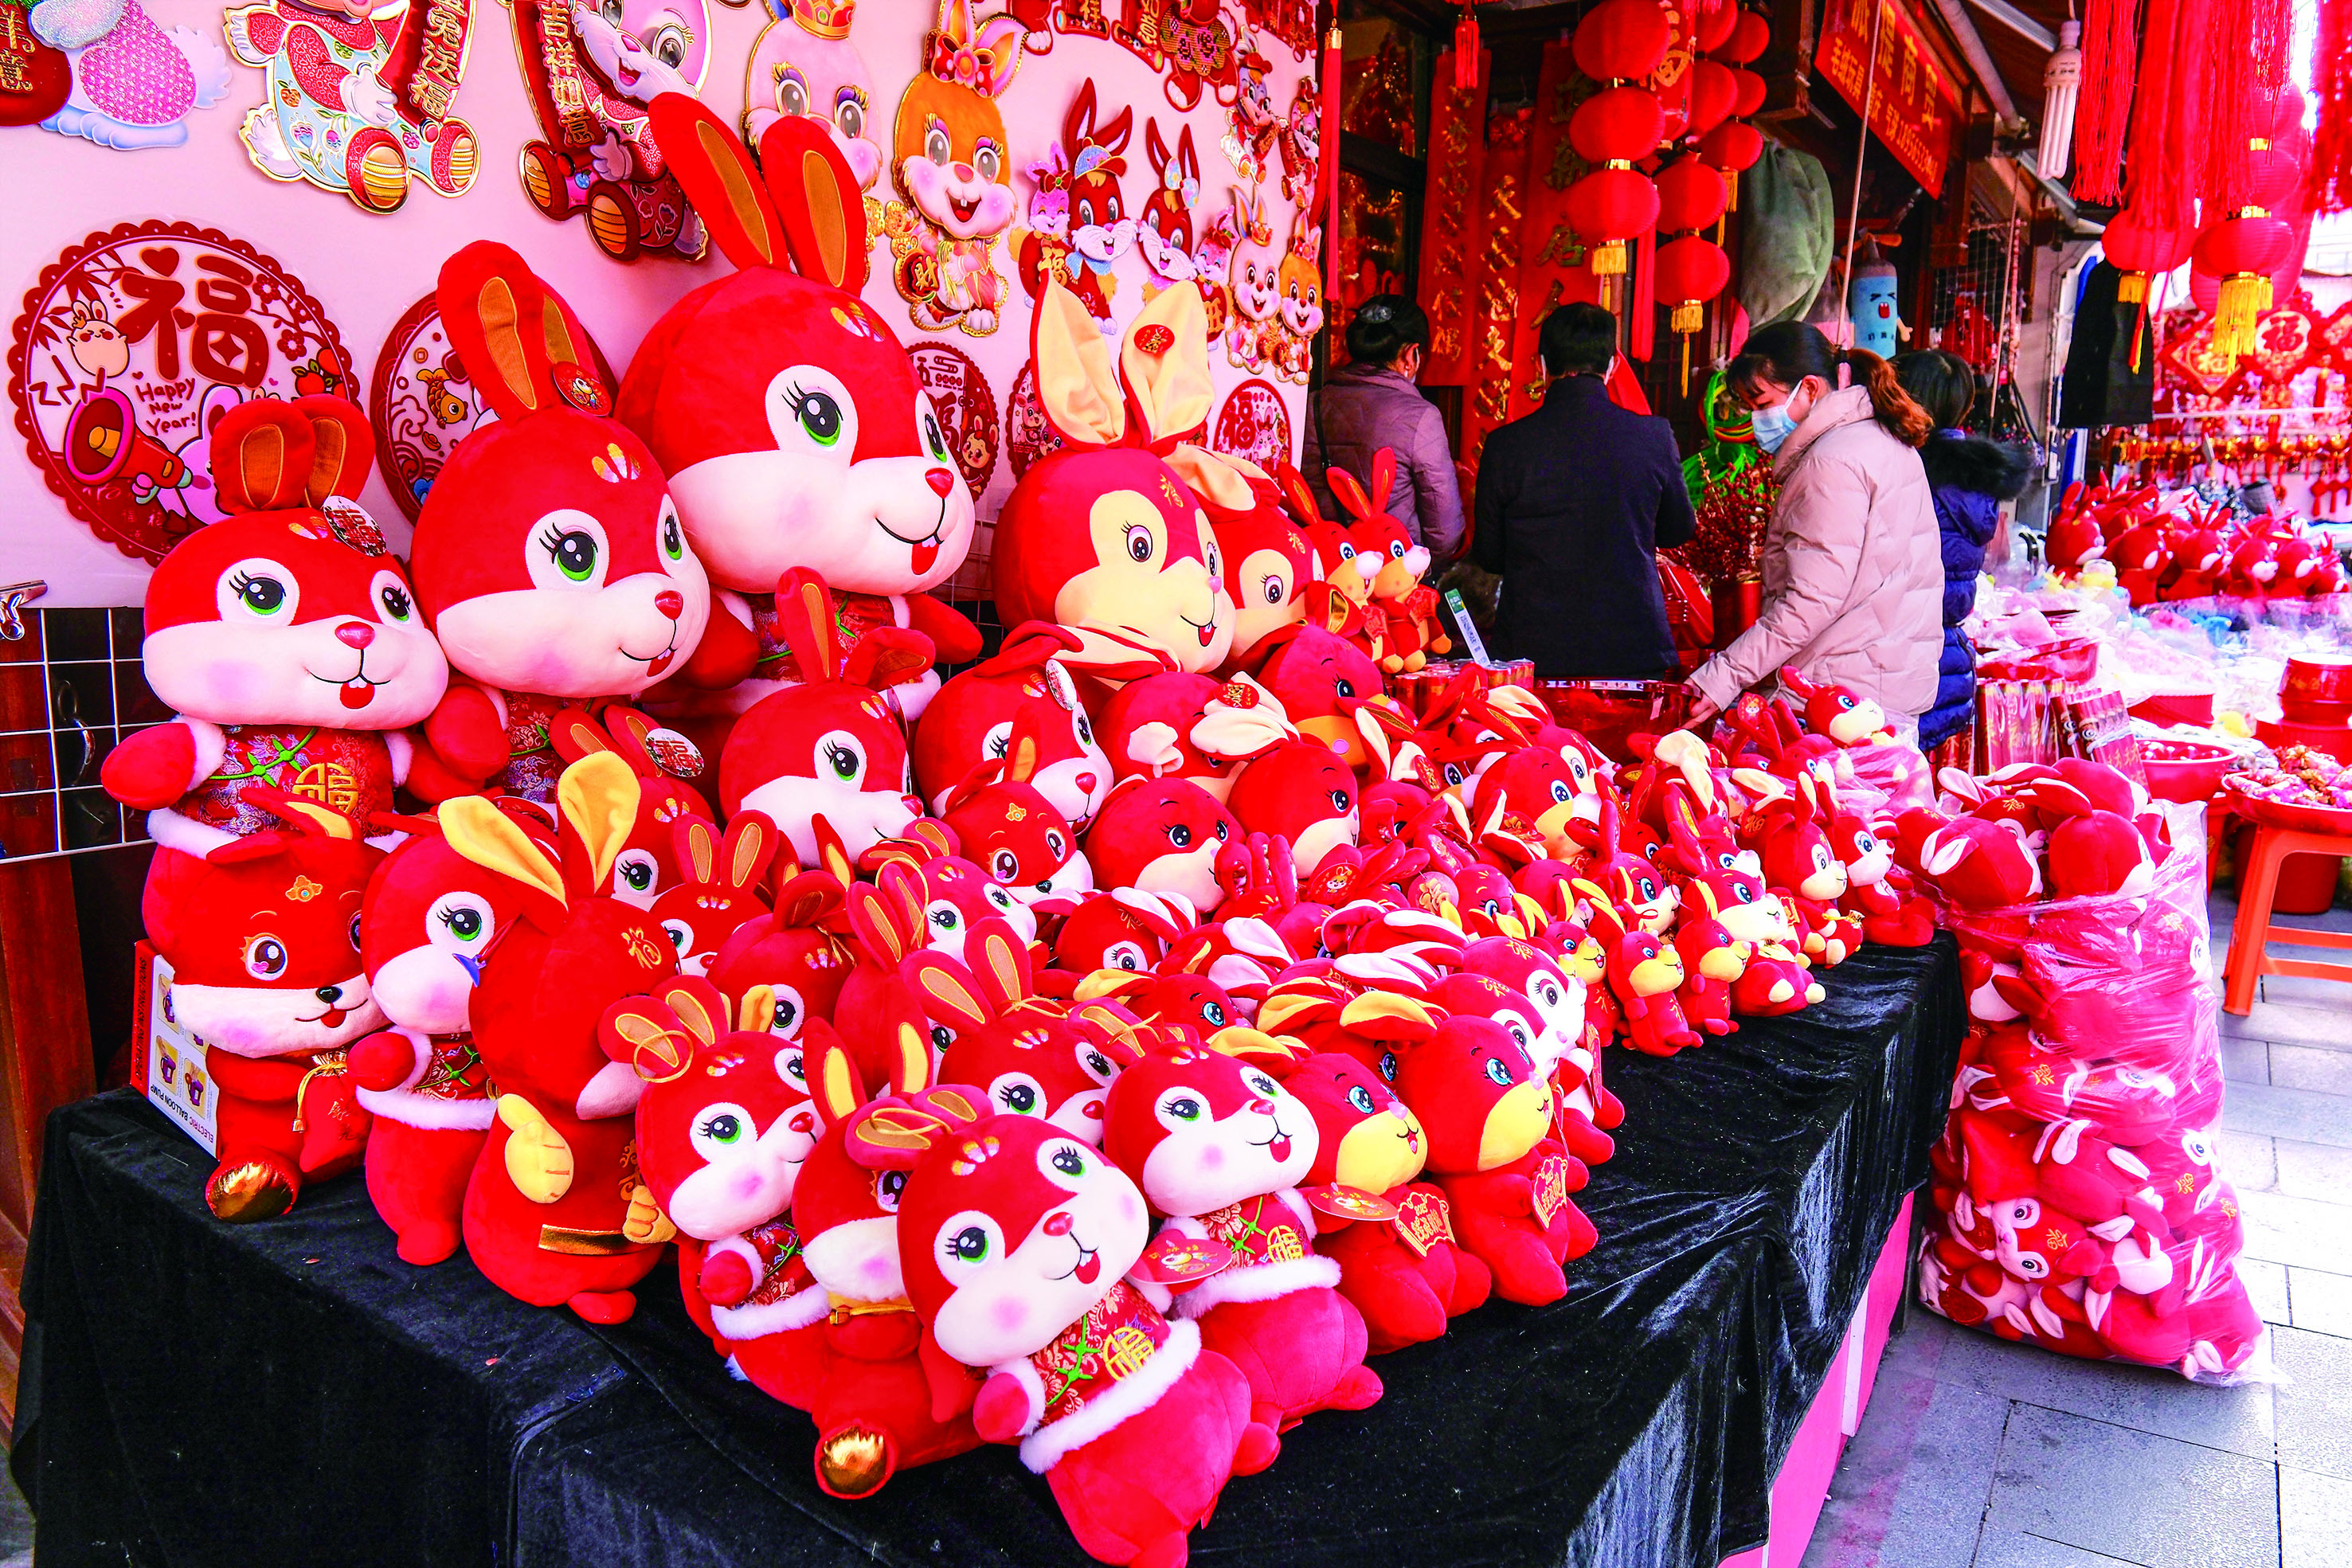 People shop for decorations at a market in Hefei, East China’s Anhui Province on December14, 2022. As the Year of the Rabbit, which falls on January 22, 2023, is about to arrive, rabbit-related decorations as well as spring festival scrolls and papercuts for window decorations are hot sellers. Photo: VCG